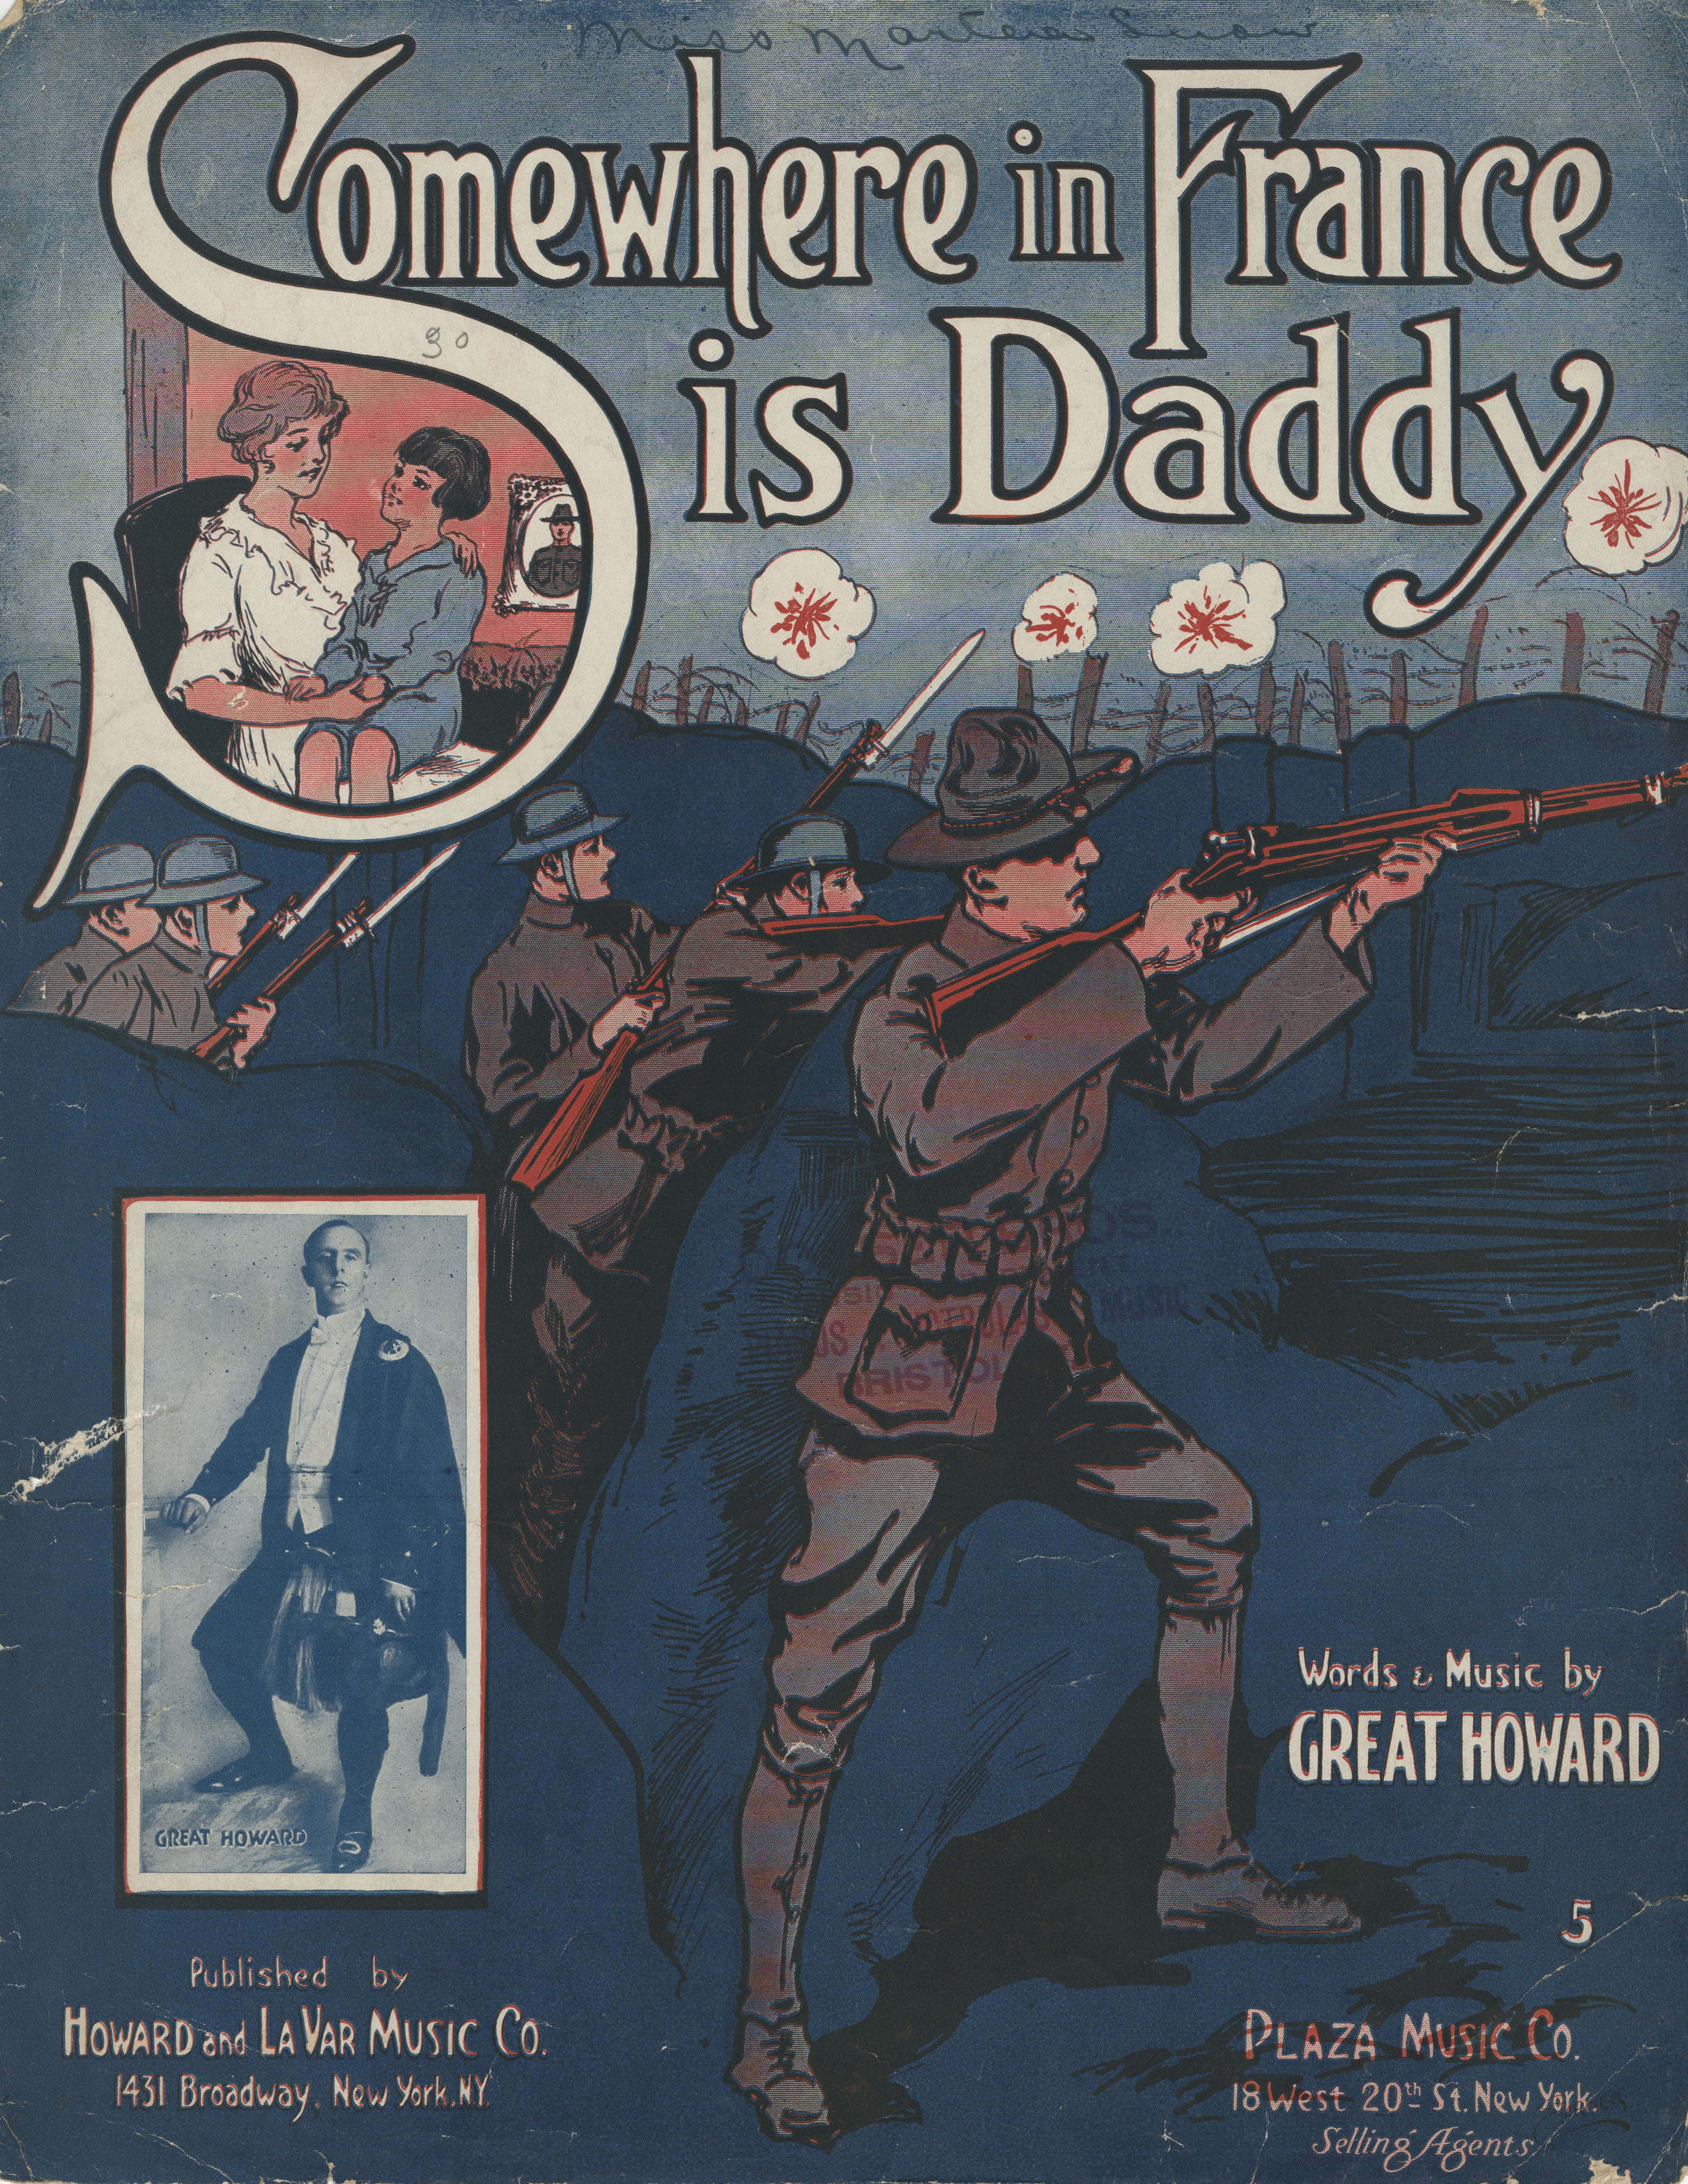 "Somewhere In France is Daddy" (Published, Howard and LaVar Music, New York, 1917)